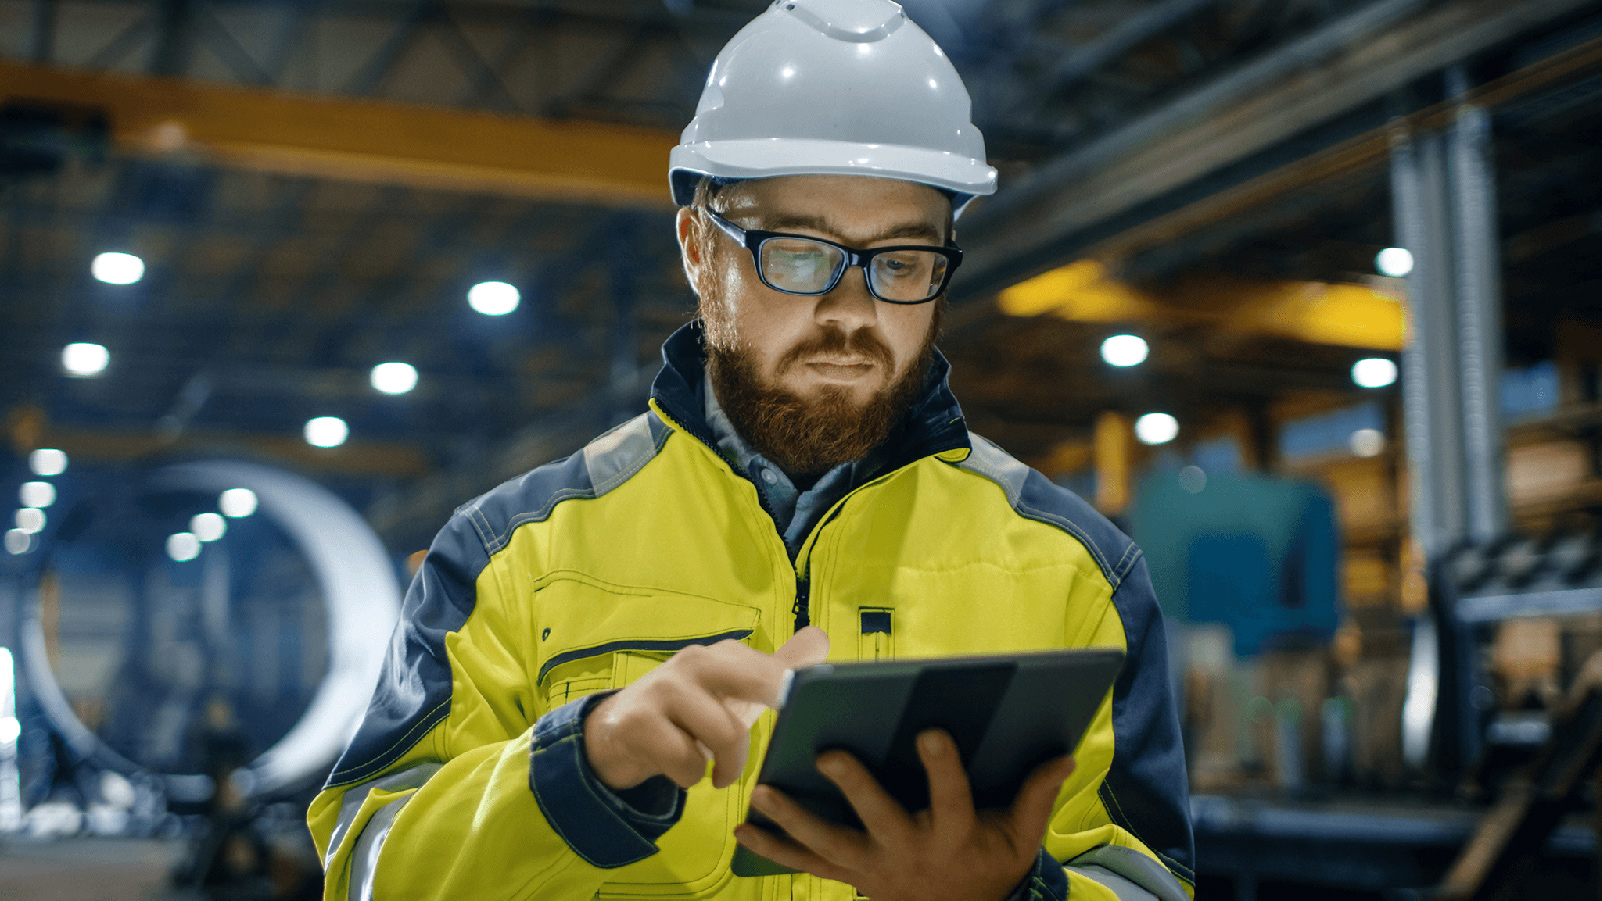 Man in a warehouse facility wearing a hard hat looking at a tablet.